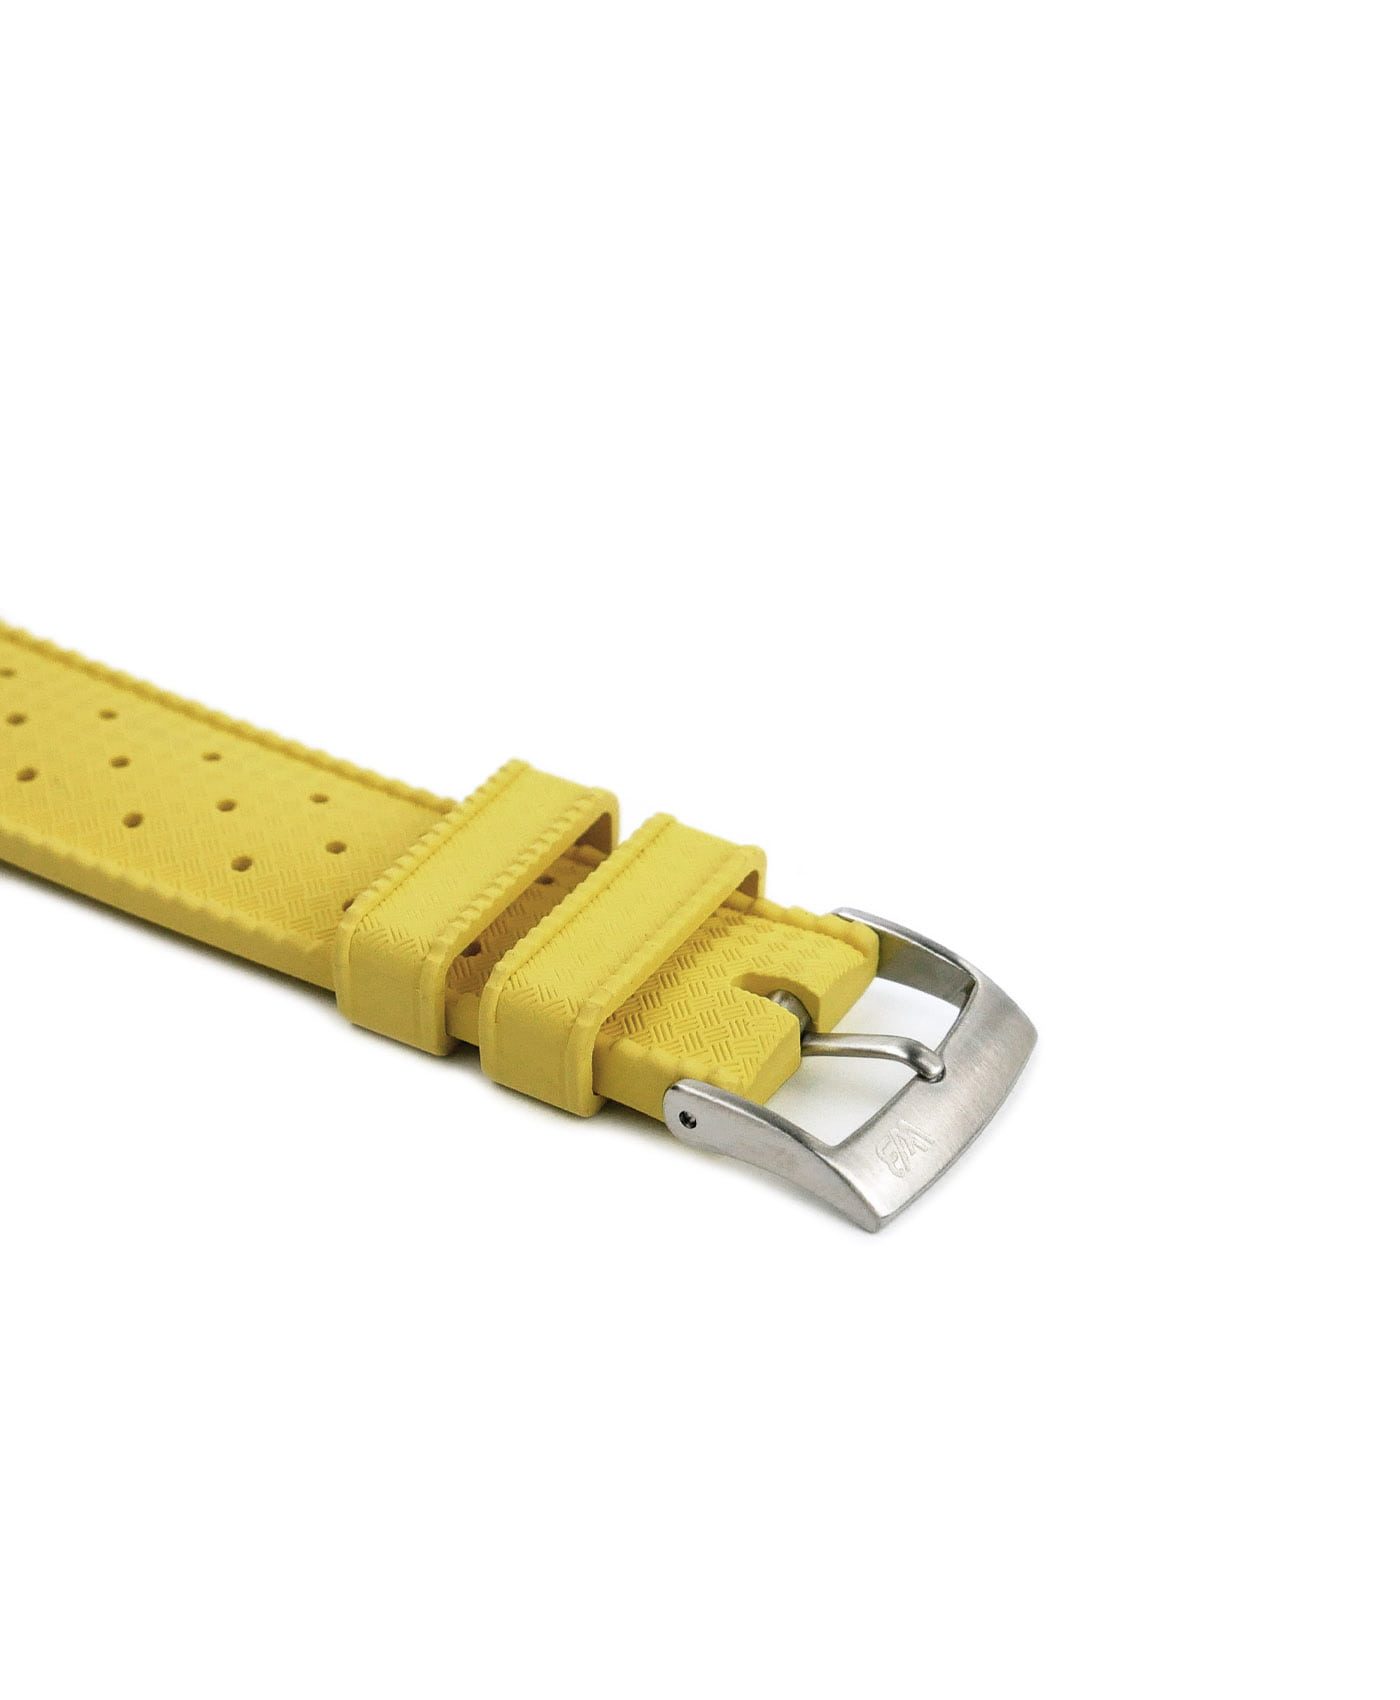 Tropical Rubber watch strap_Yellow_Buckle